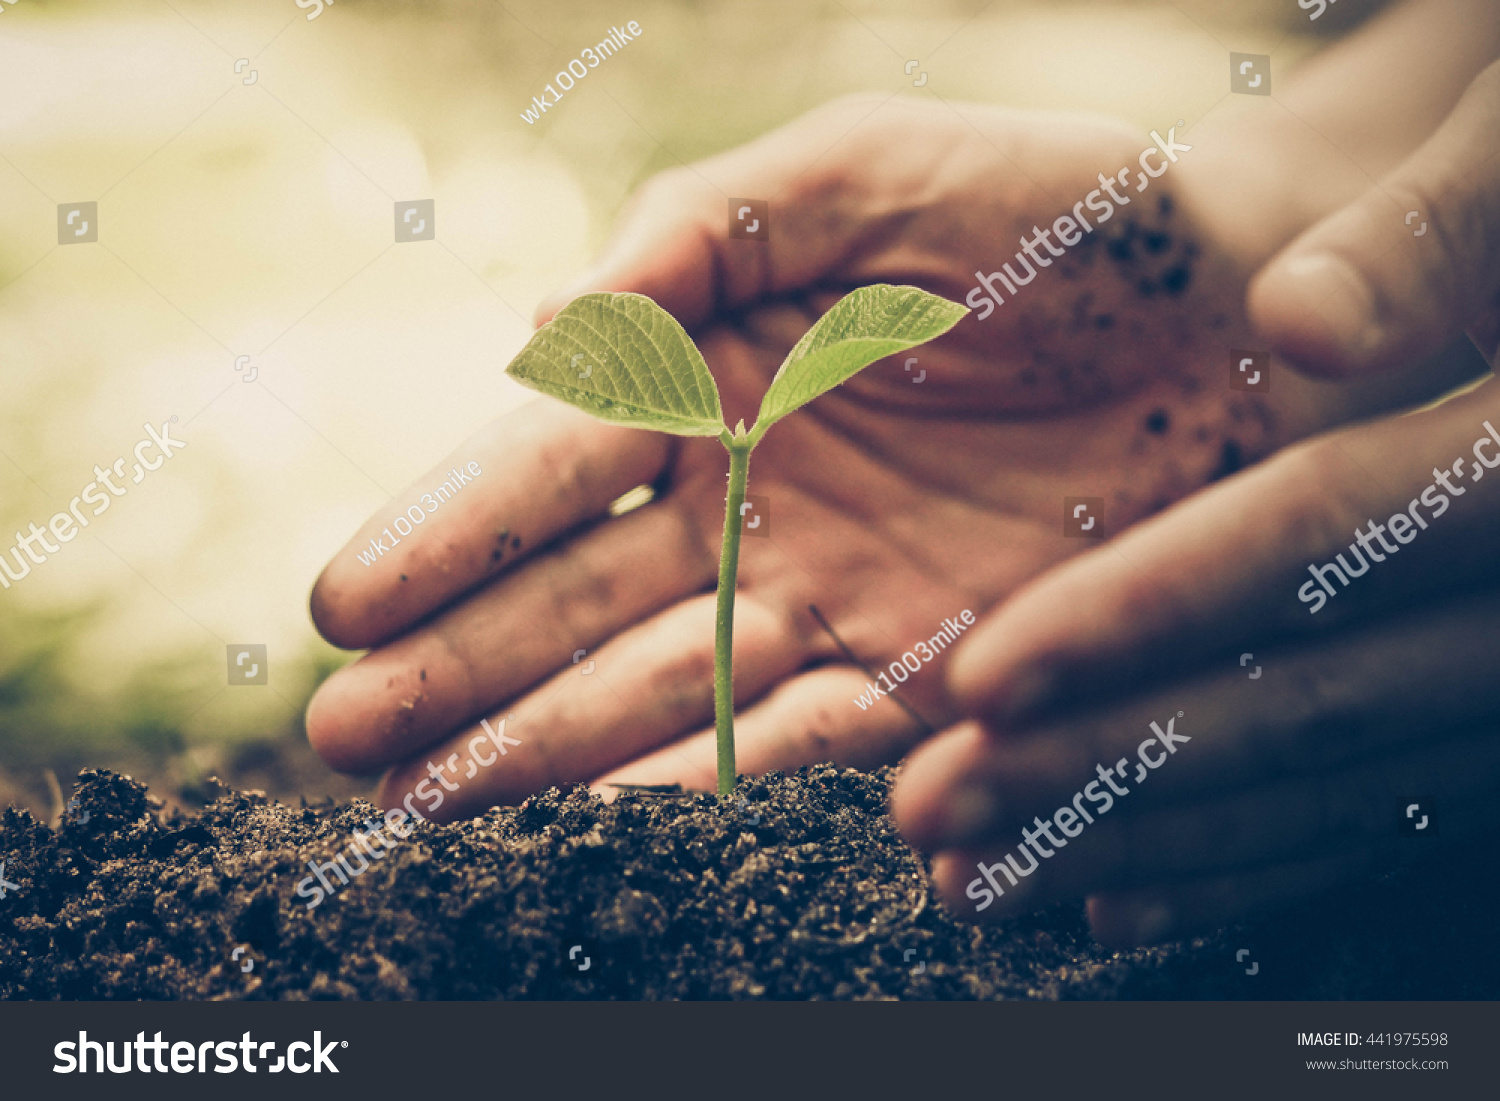 Hands of farmer growing and nurturing tree growing on fertile soil with green and yellow bokeh background /nurturing baby plant / protect nature / Earth day concept #441975598